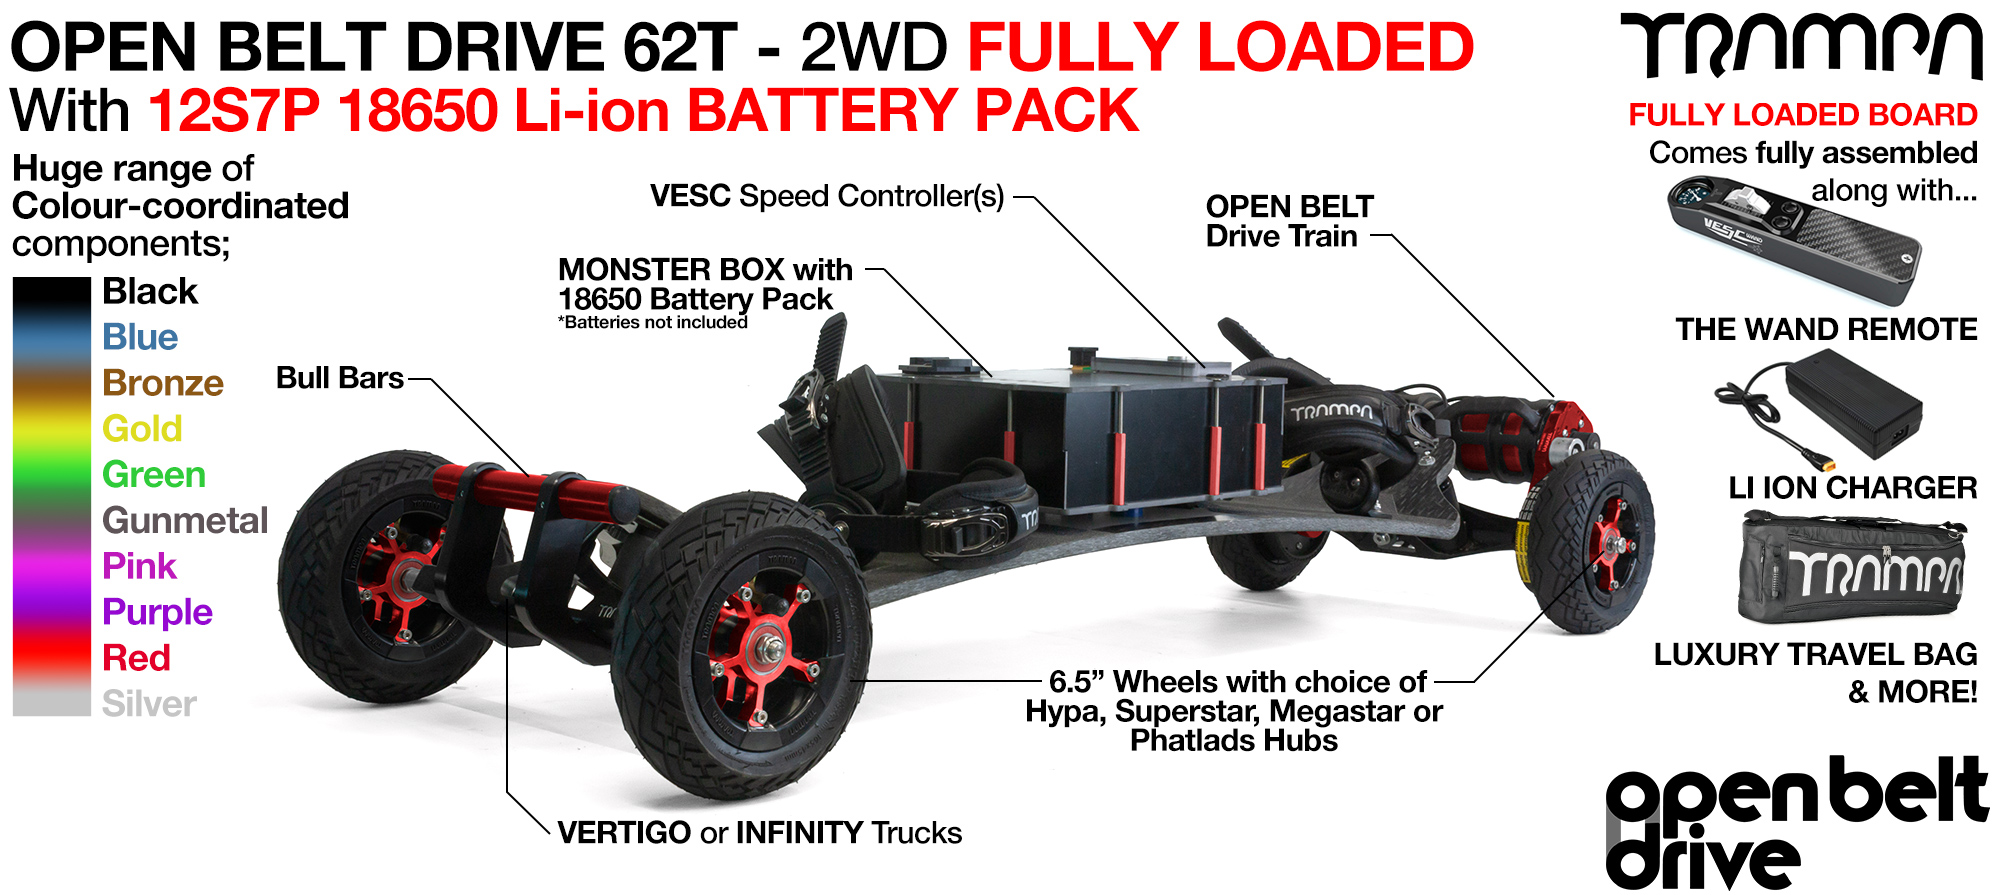 2WD 66T Open Belt Drive TRAMPA Electric Mountainboard with 6 Inch URBAN TREADs Wheels & 62 Tooth Pulleys - FULLY LOADED DOUBLE STACK 18650 CELL Pack